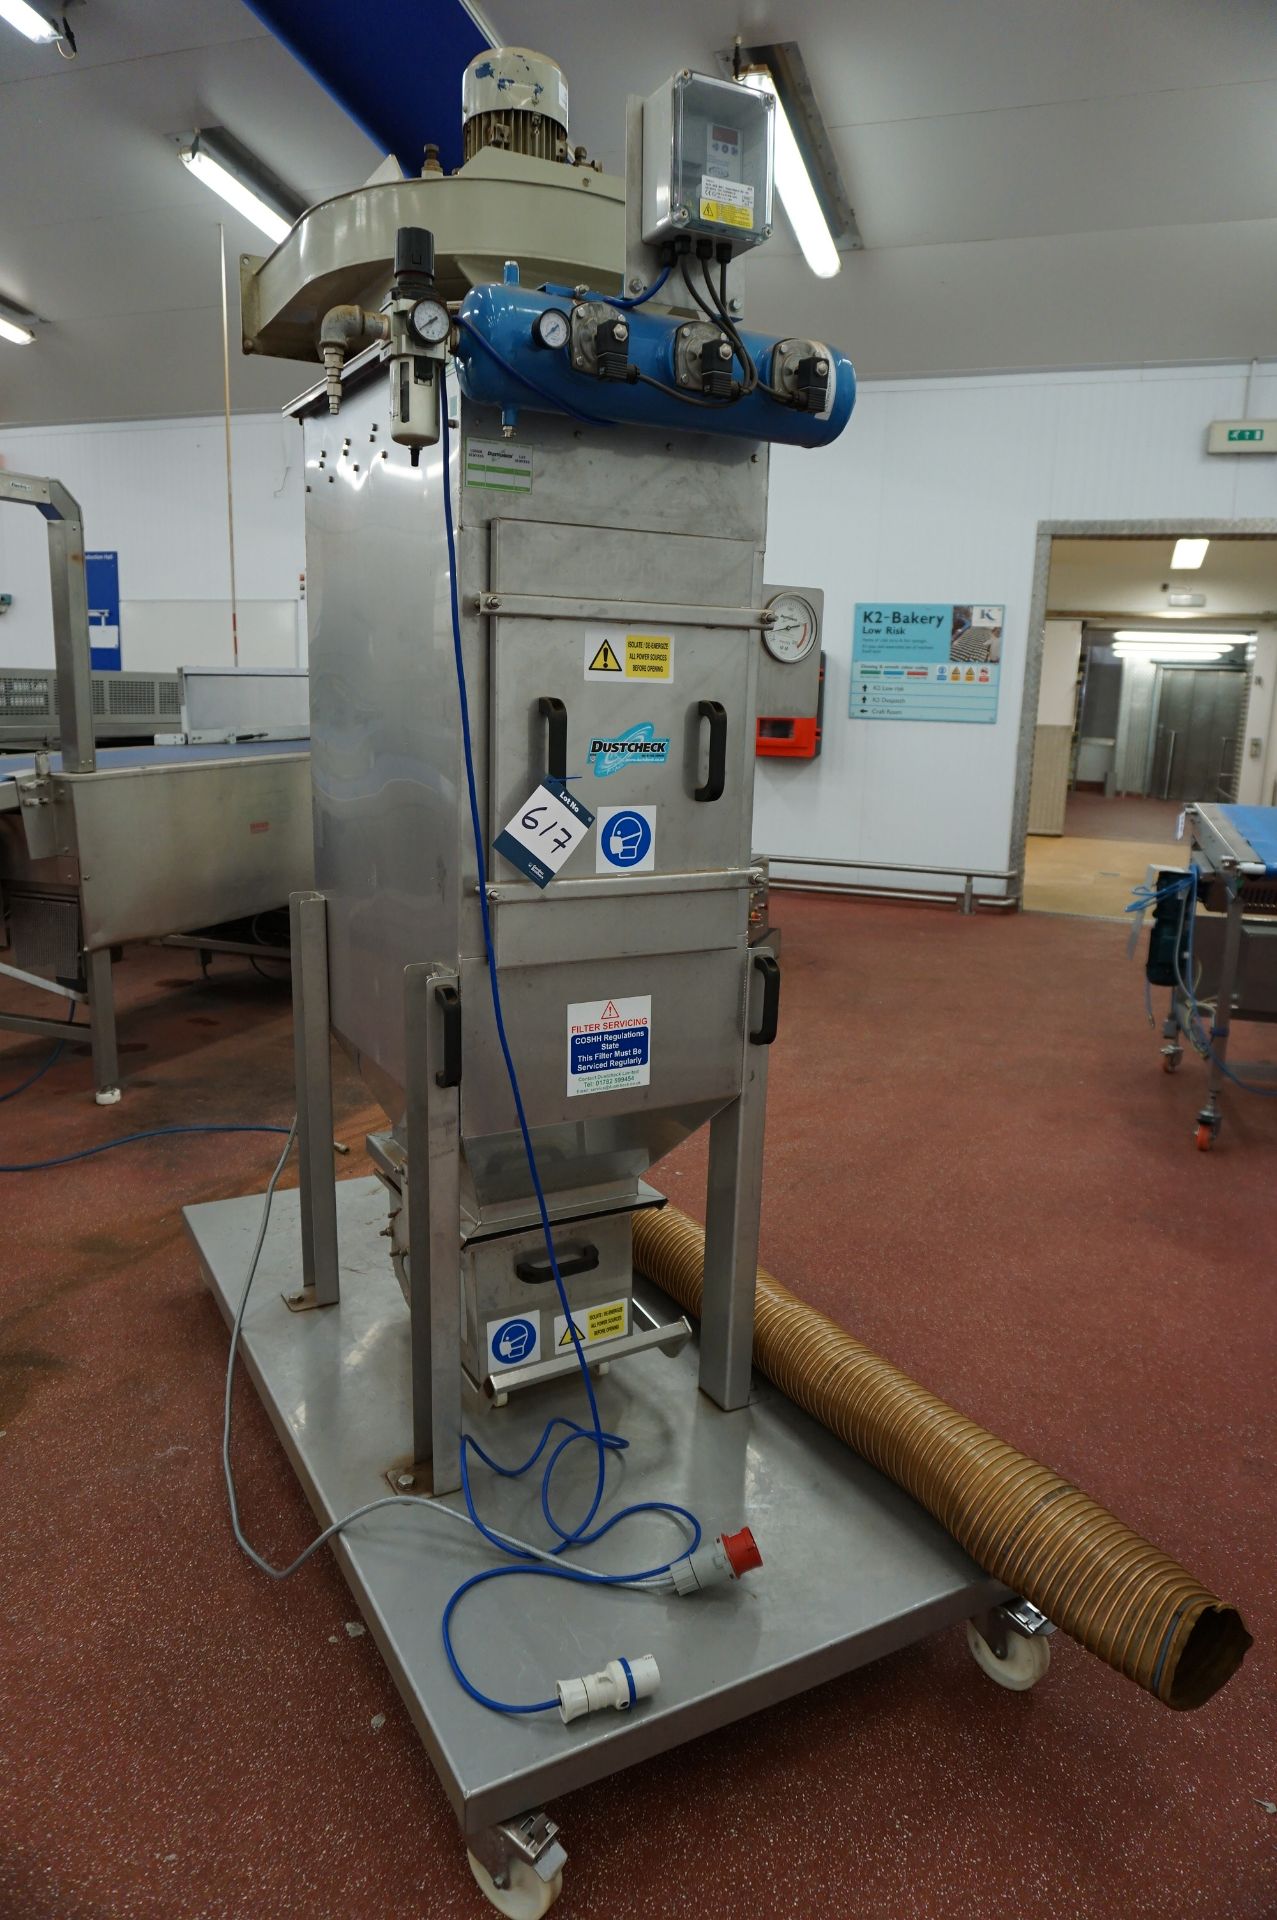 Dustcheck, Model: SFKJ9-1.6-10 dust extraction unit on mobile trolley, Serial No. 8479 (2015)